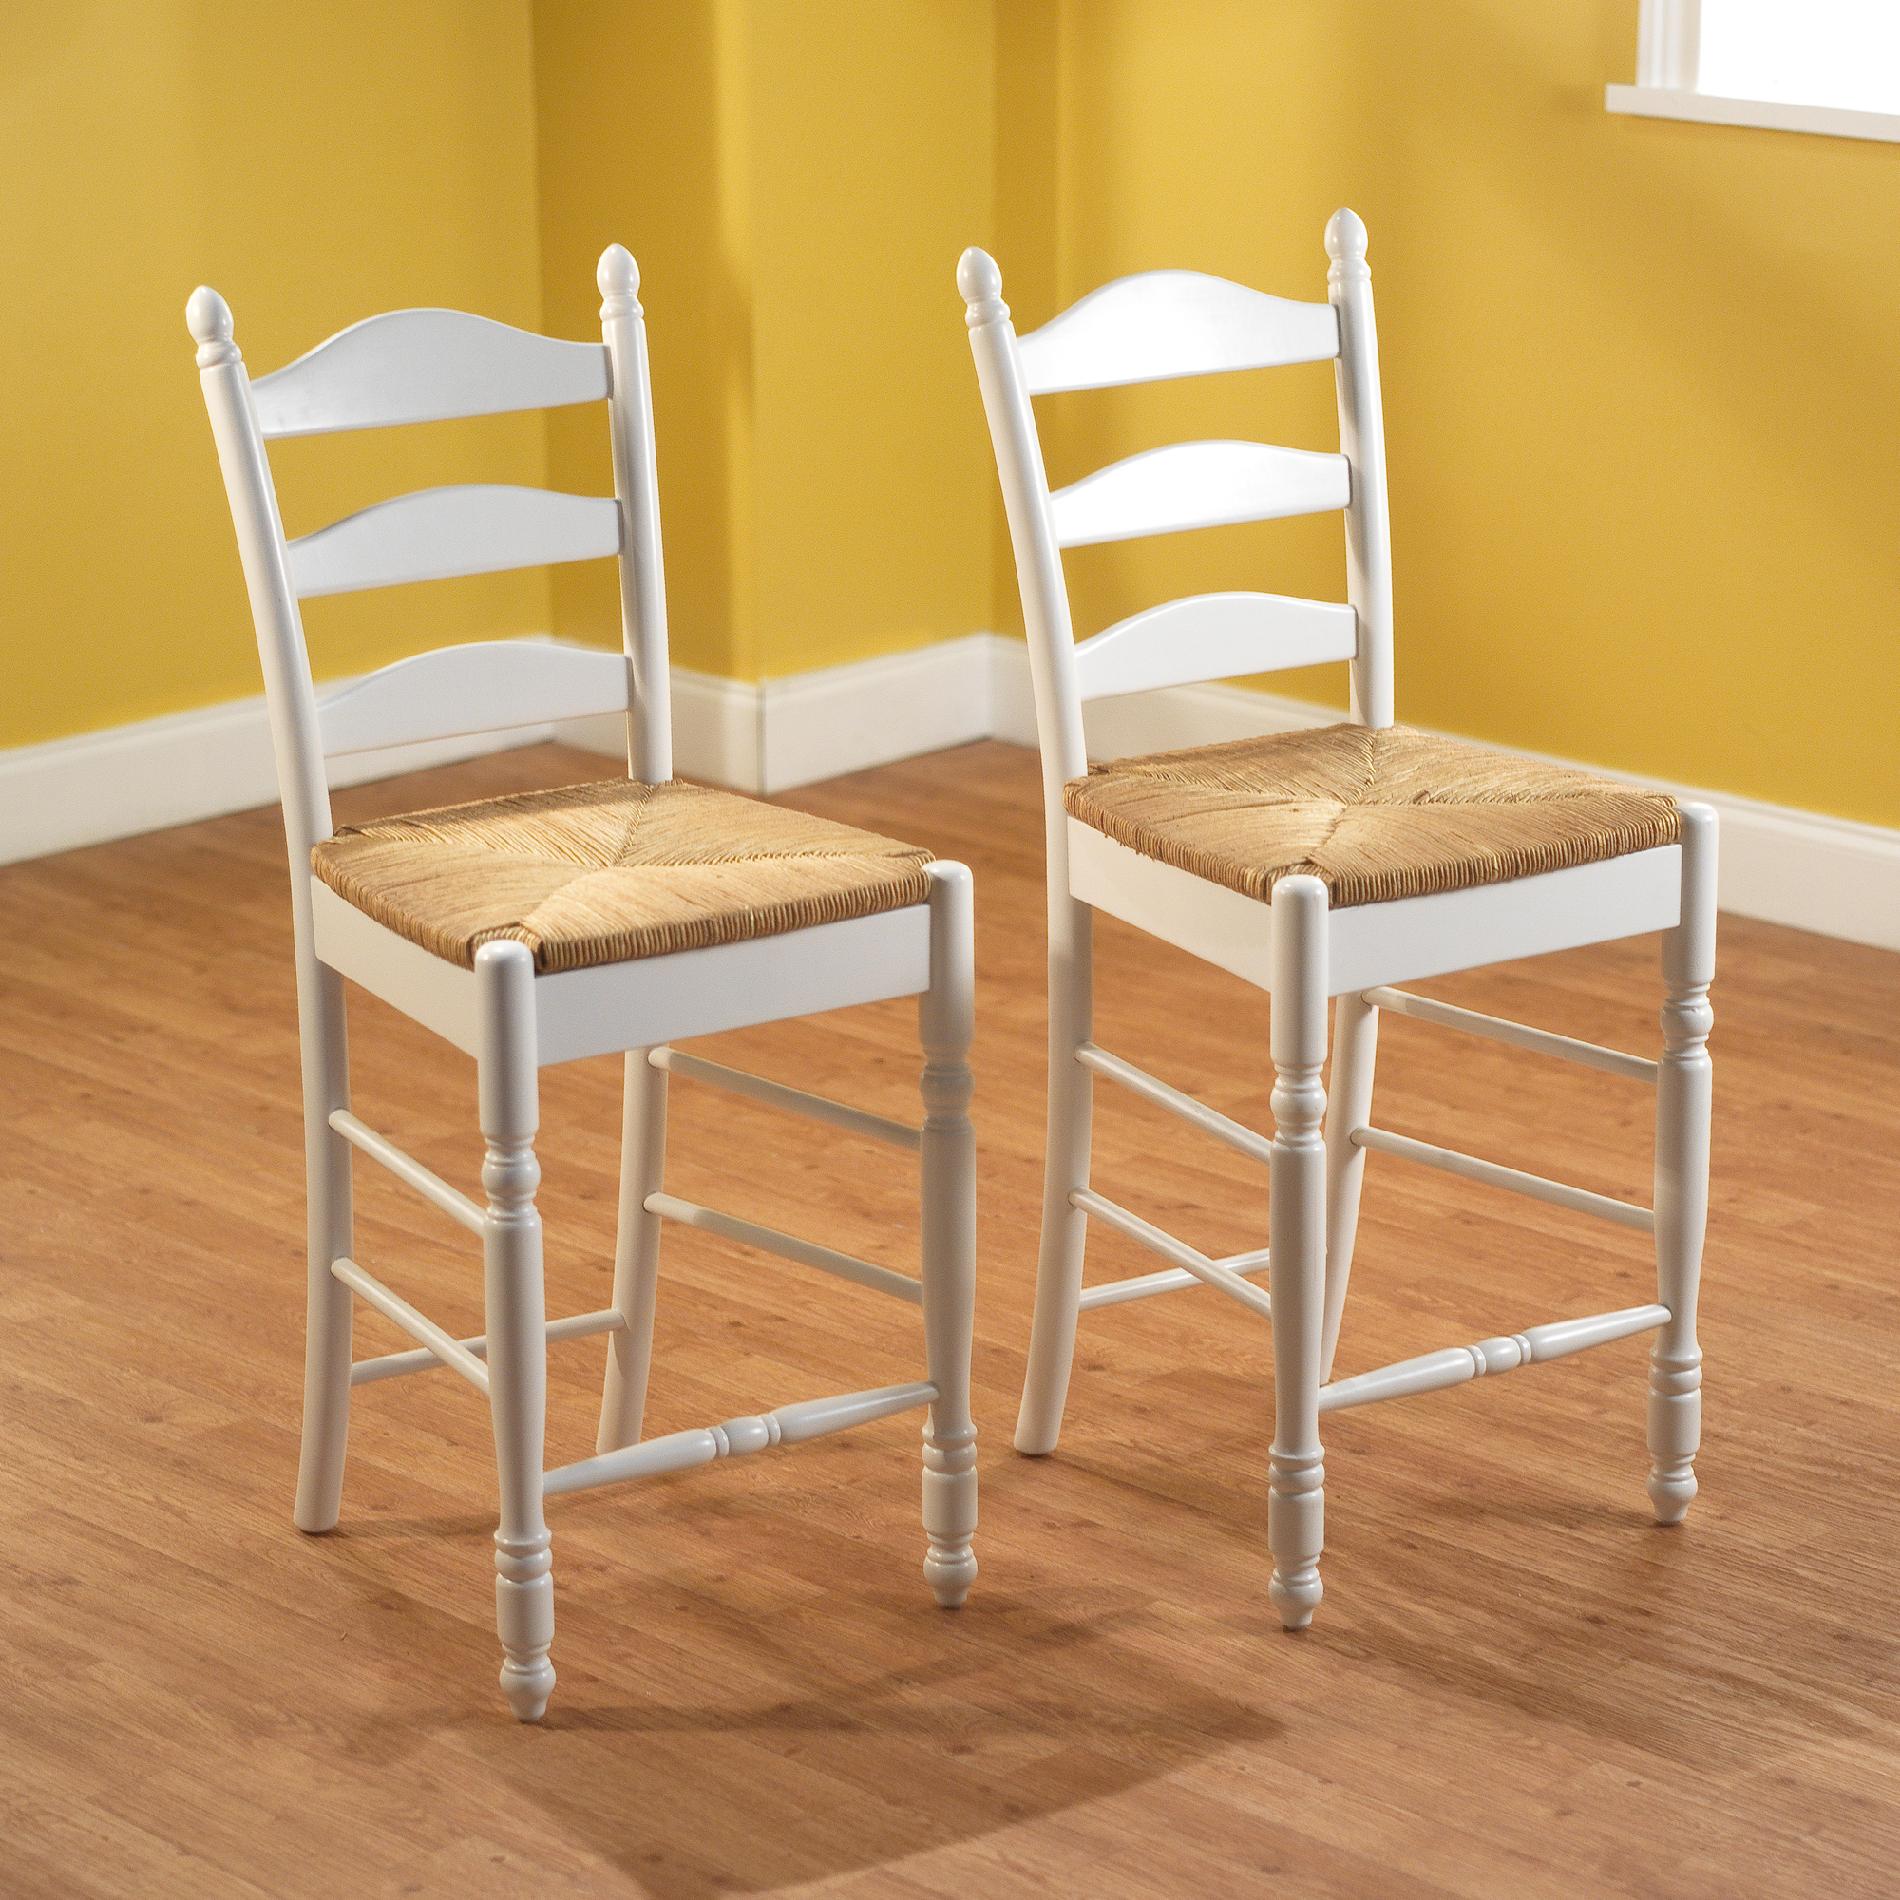 2pc set of Ladderback stools in white 24"